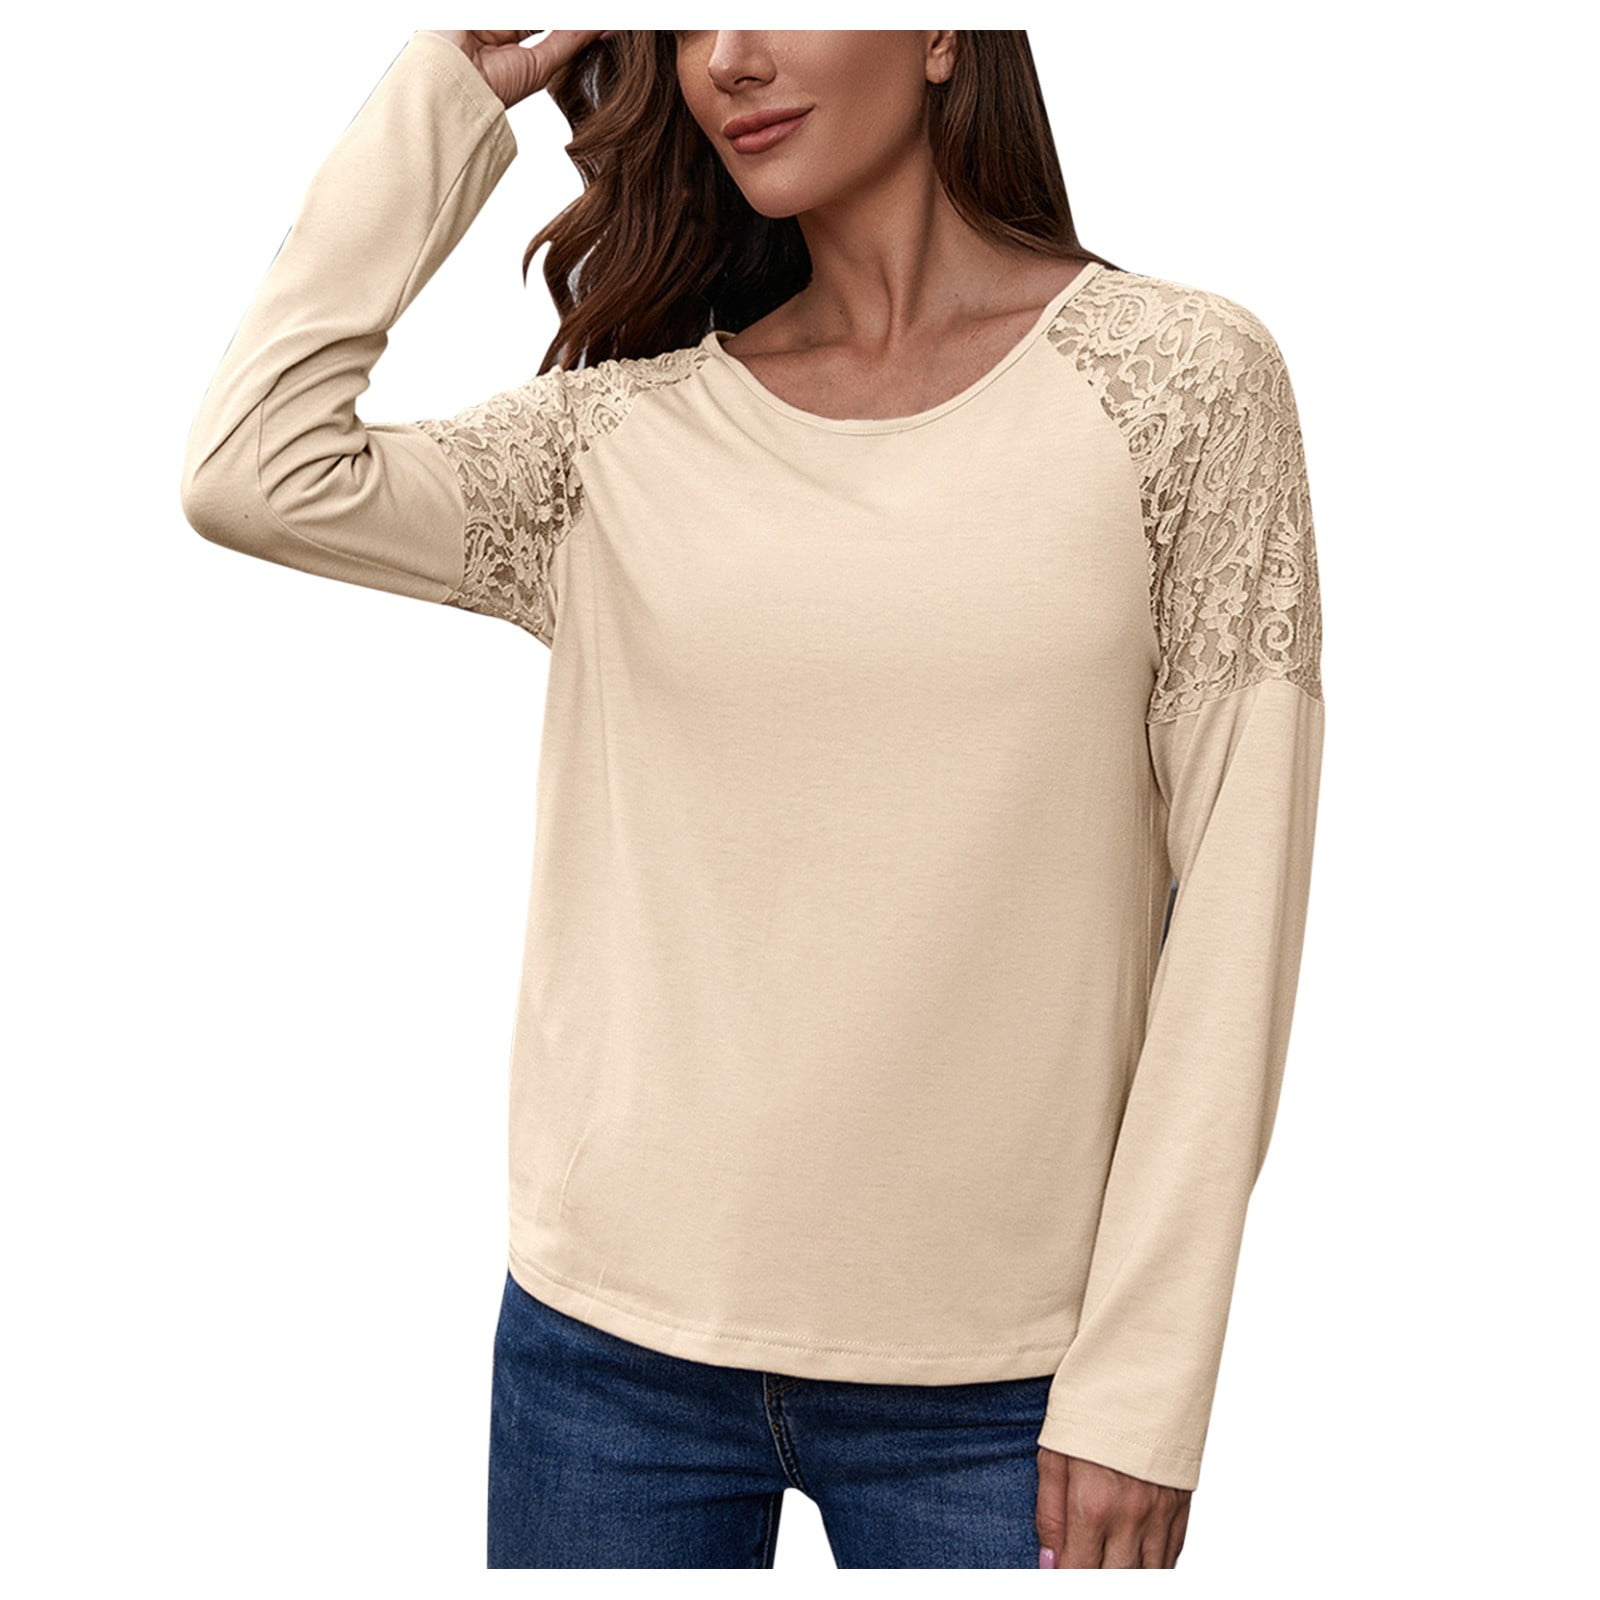 NKOOGH Misses Tops And Blouses for Fall Light Long Sleeve Women'S